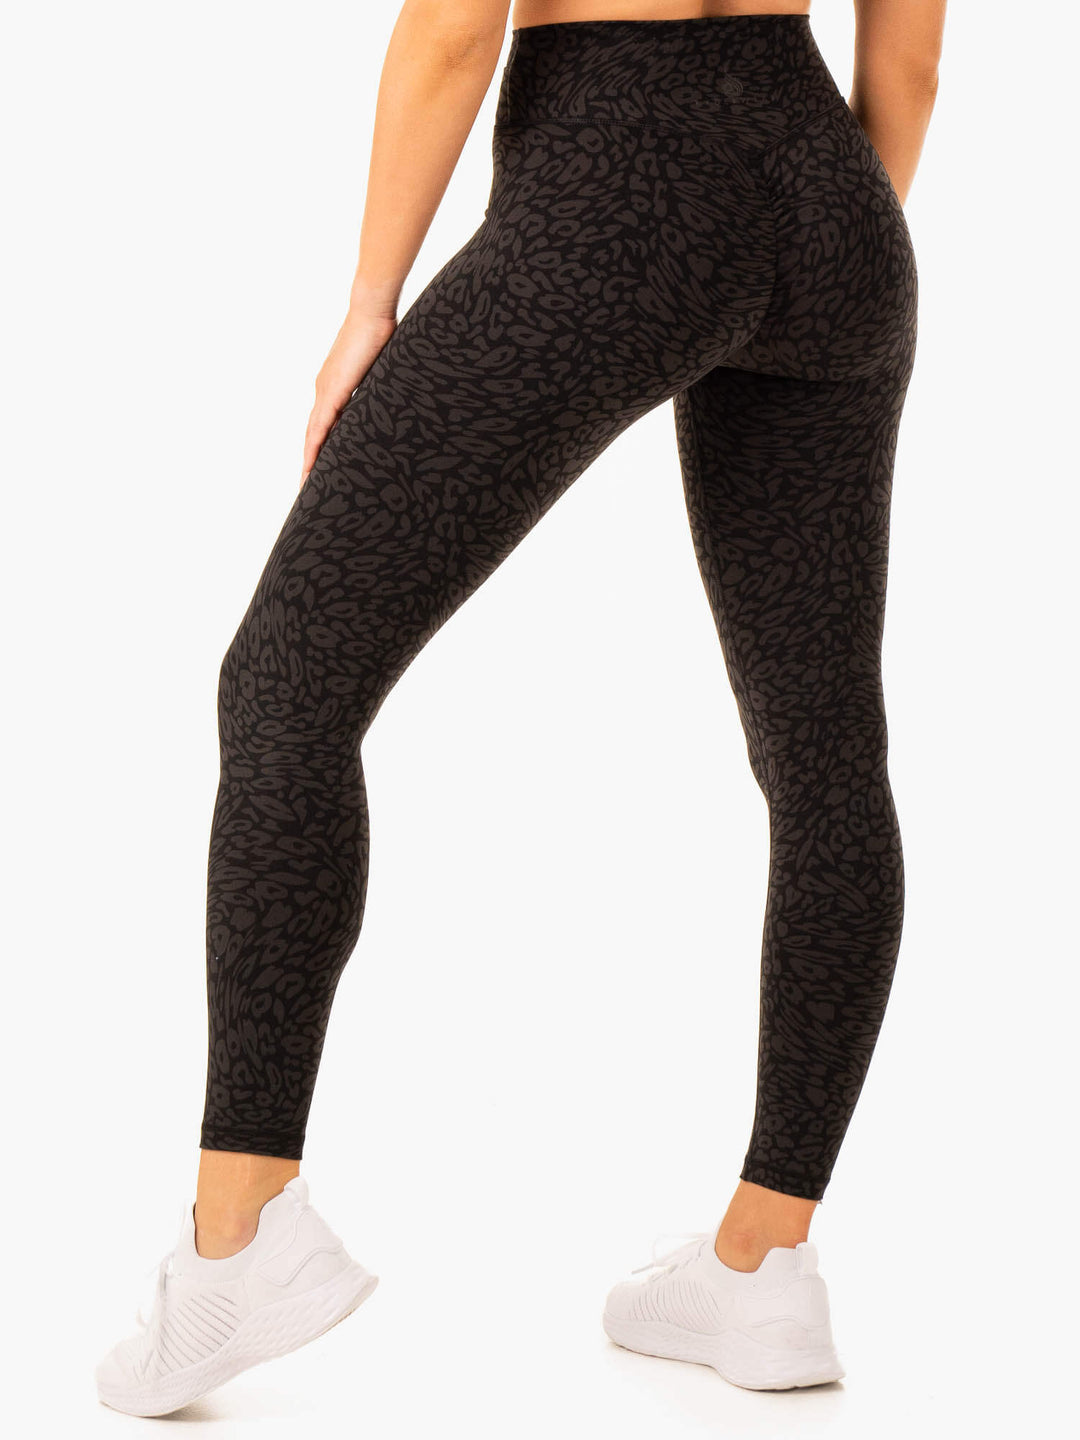 Ryderwear Leggings - Snow Leopard Size S Multi - $36 (47% Off Retail) -  From Maggie